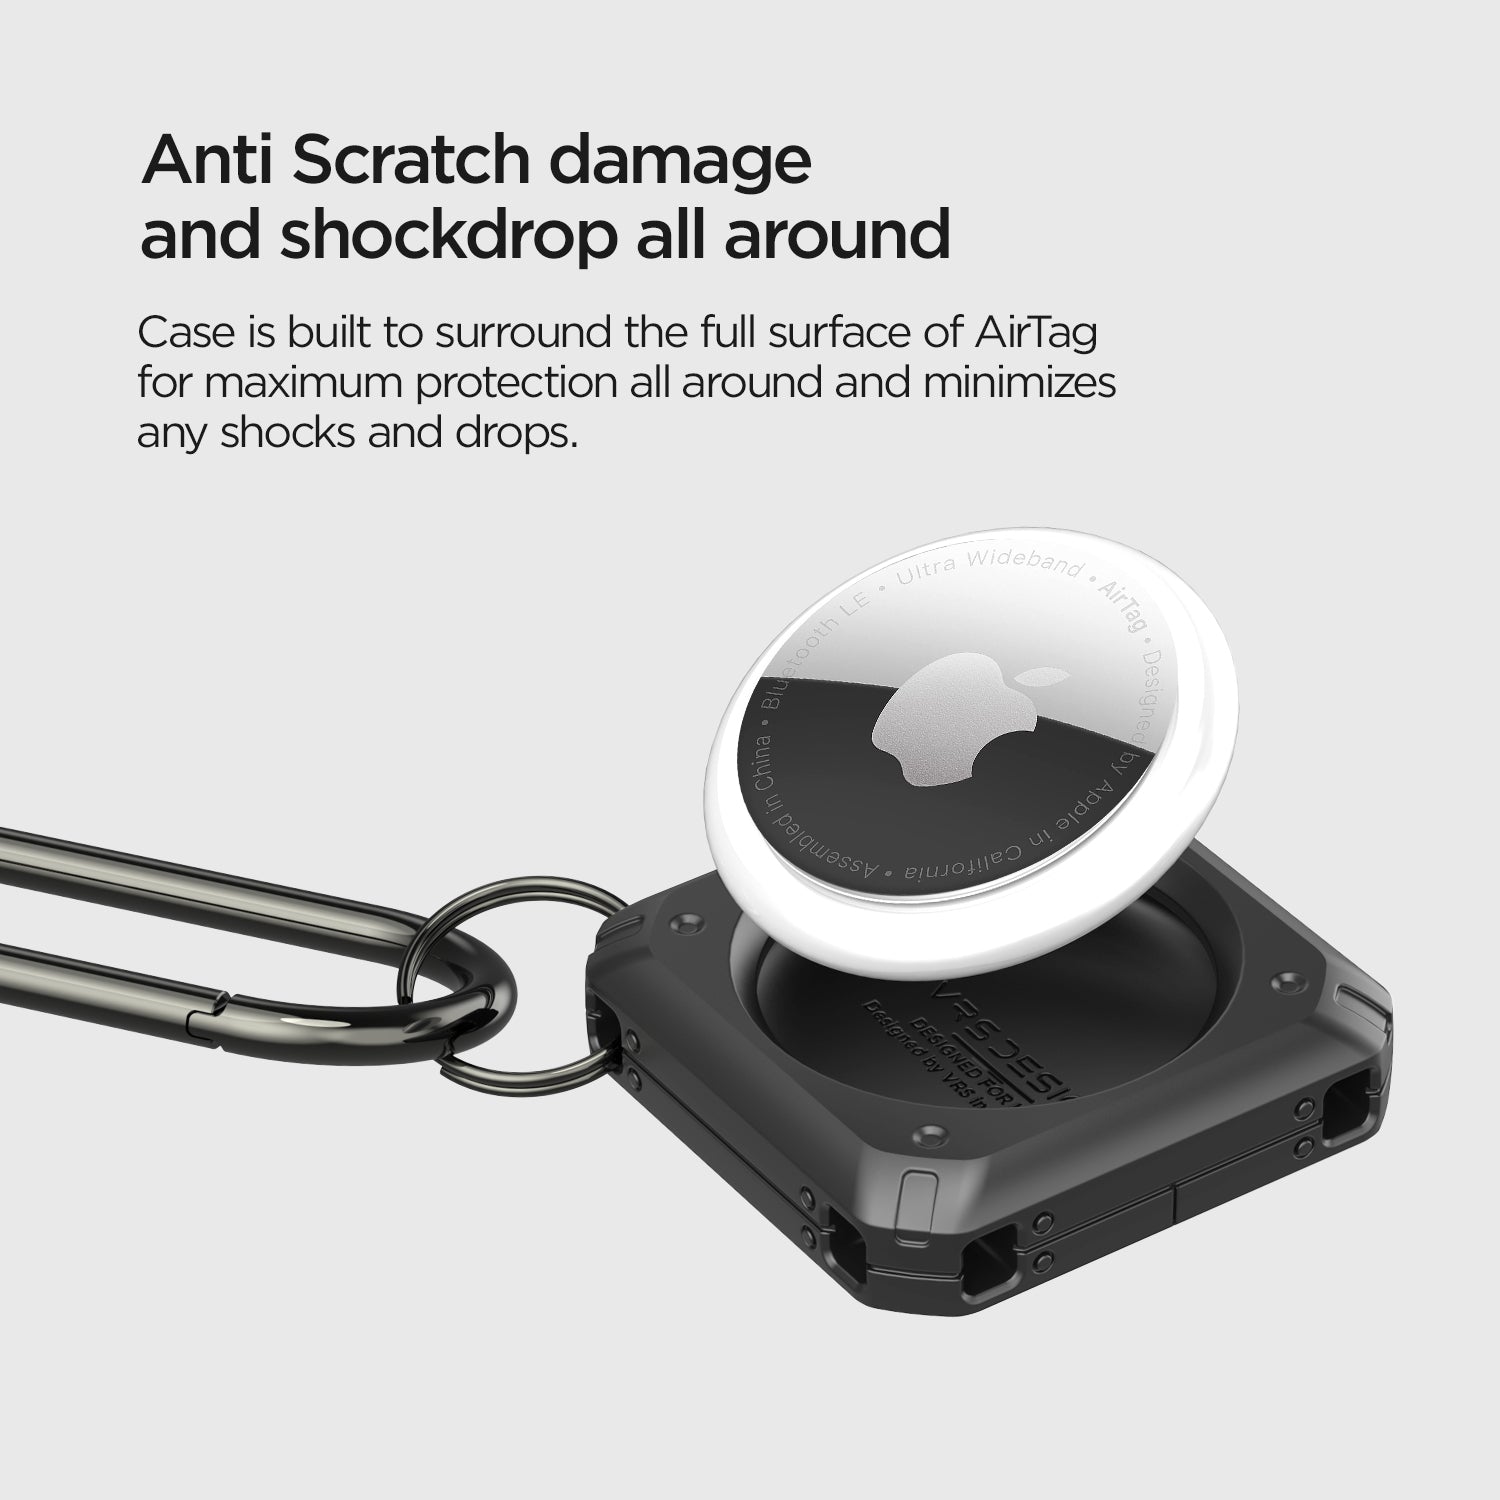 smart AirTag gadget essential that alleviates life-style convenience cover to match your Apple AirTag